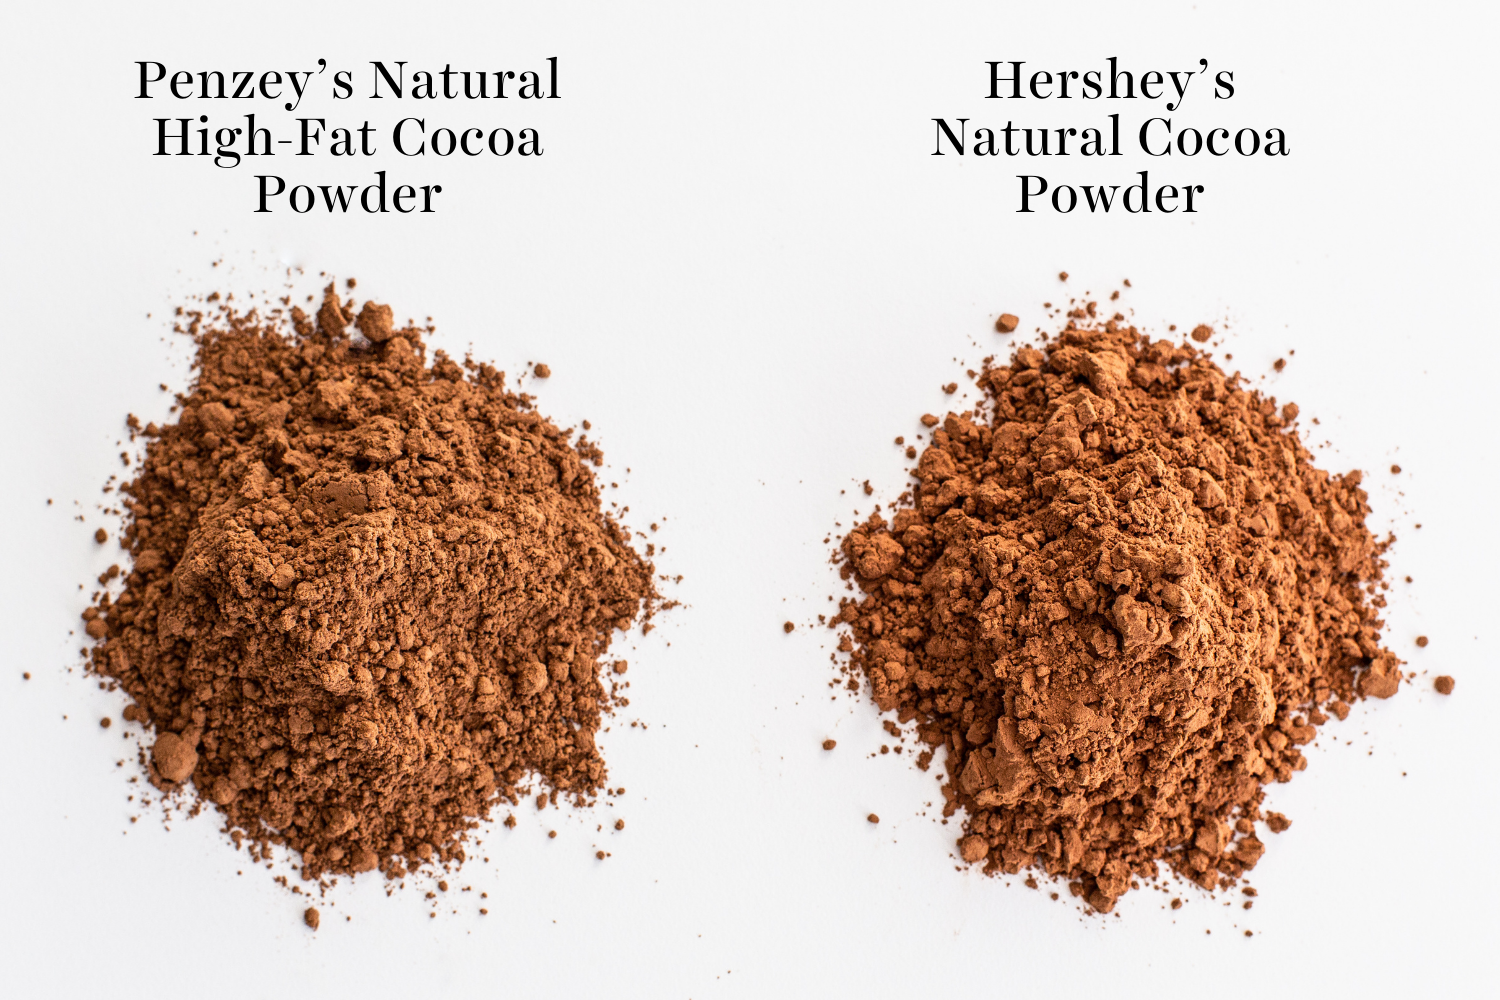 two piles of cocoa powder - one Penzey's and one Hershey's.